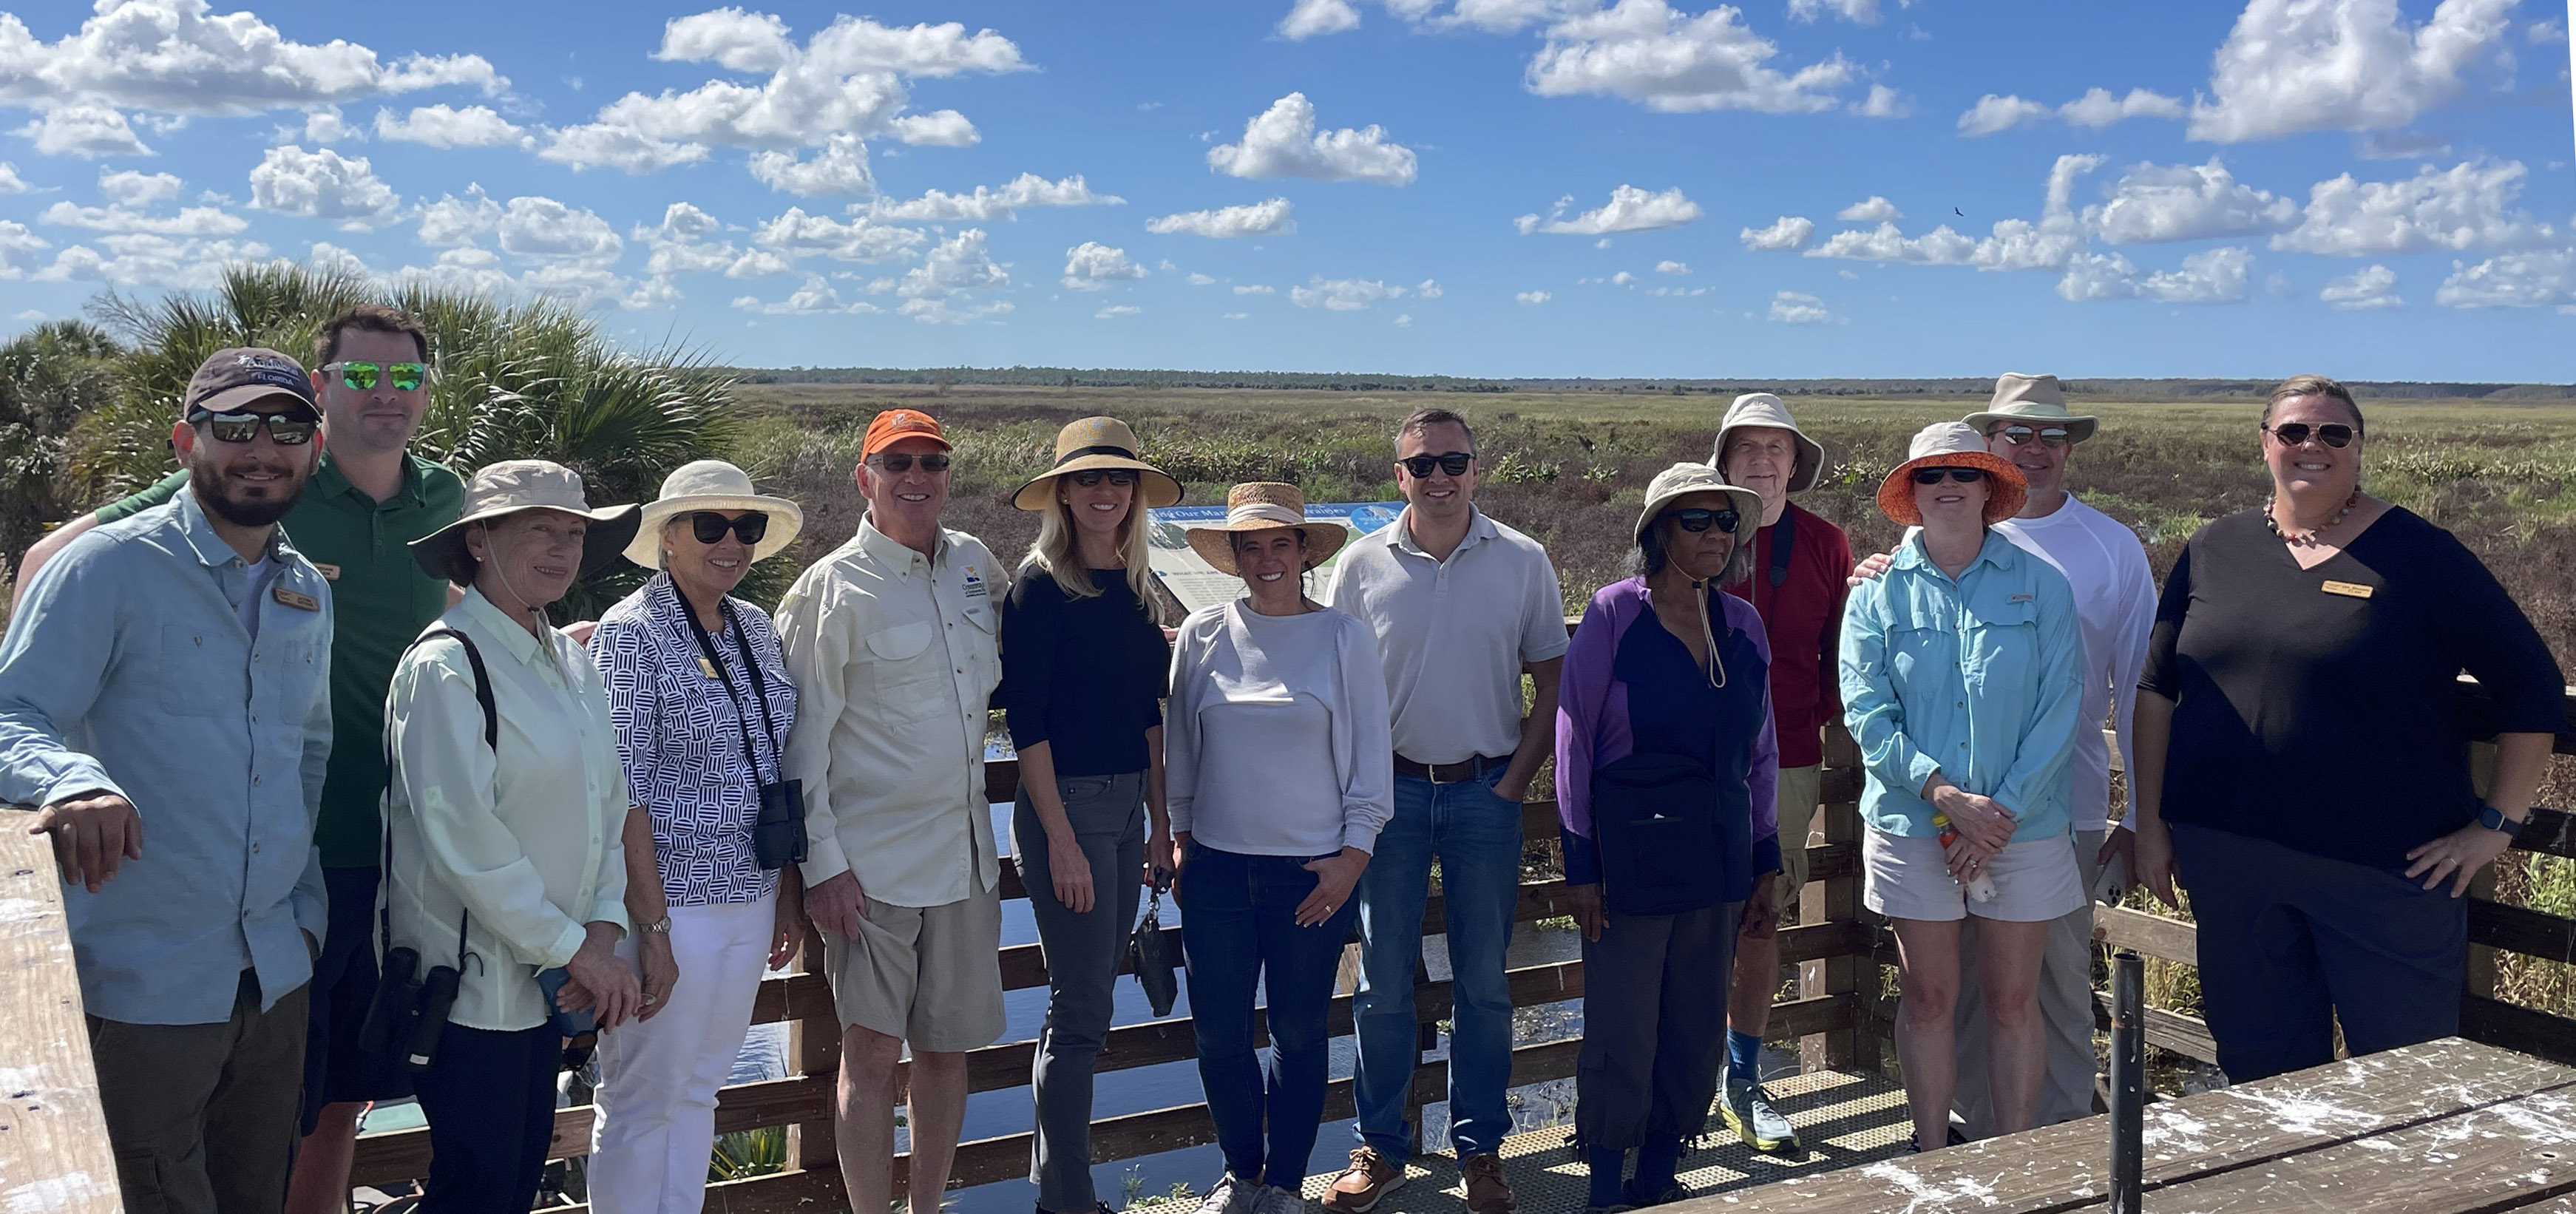 A group of people posing on a platform overlooking a wetland.